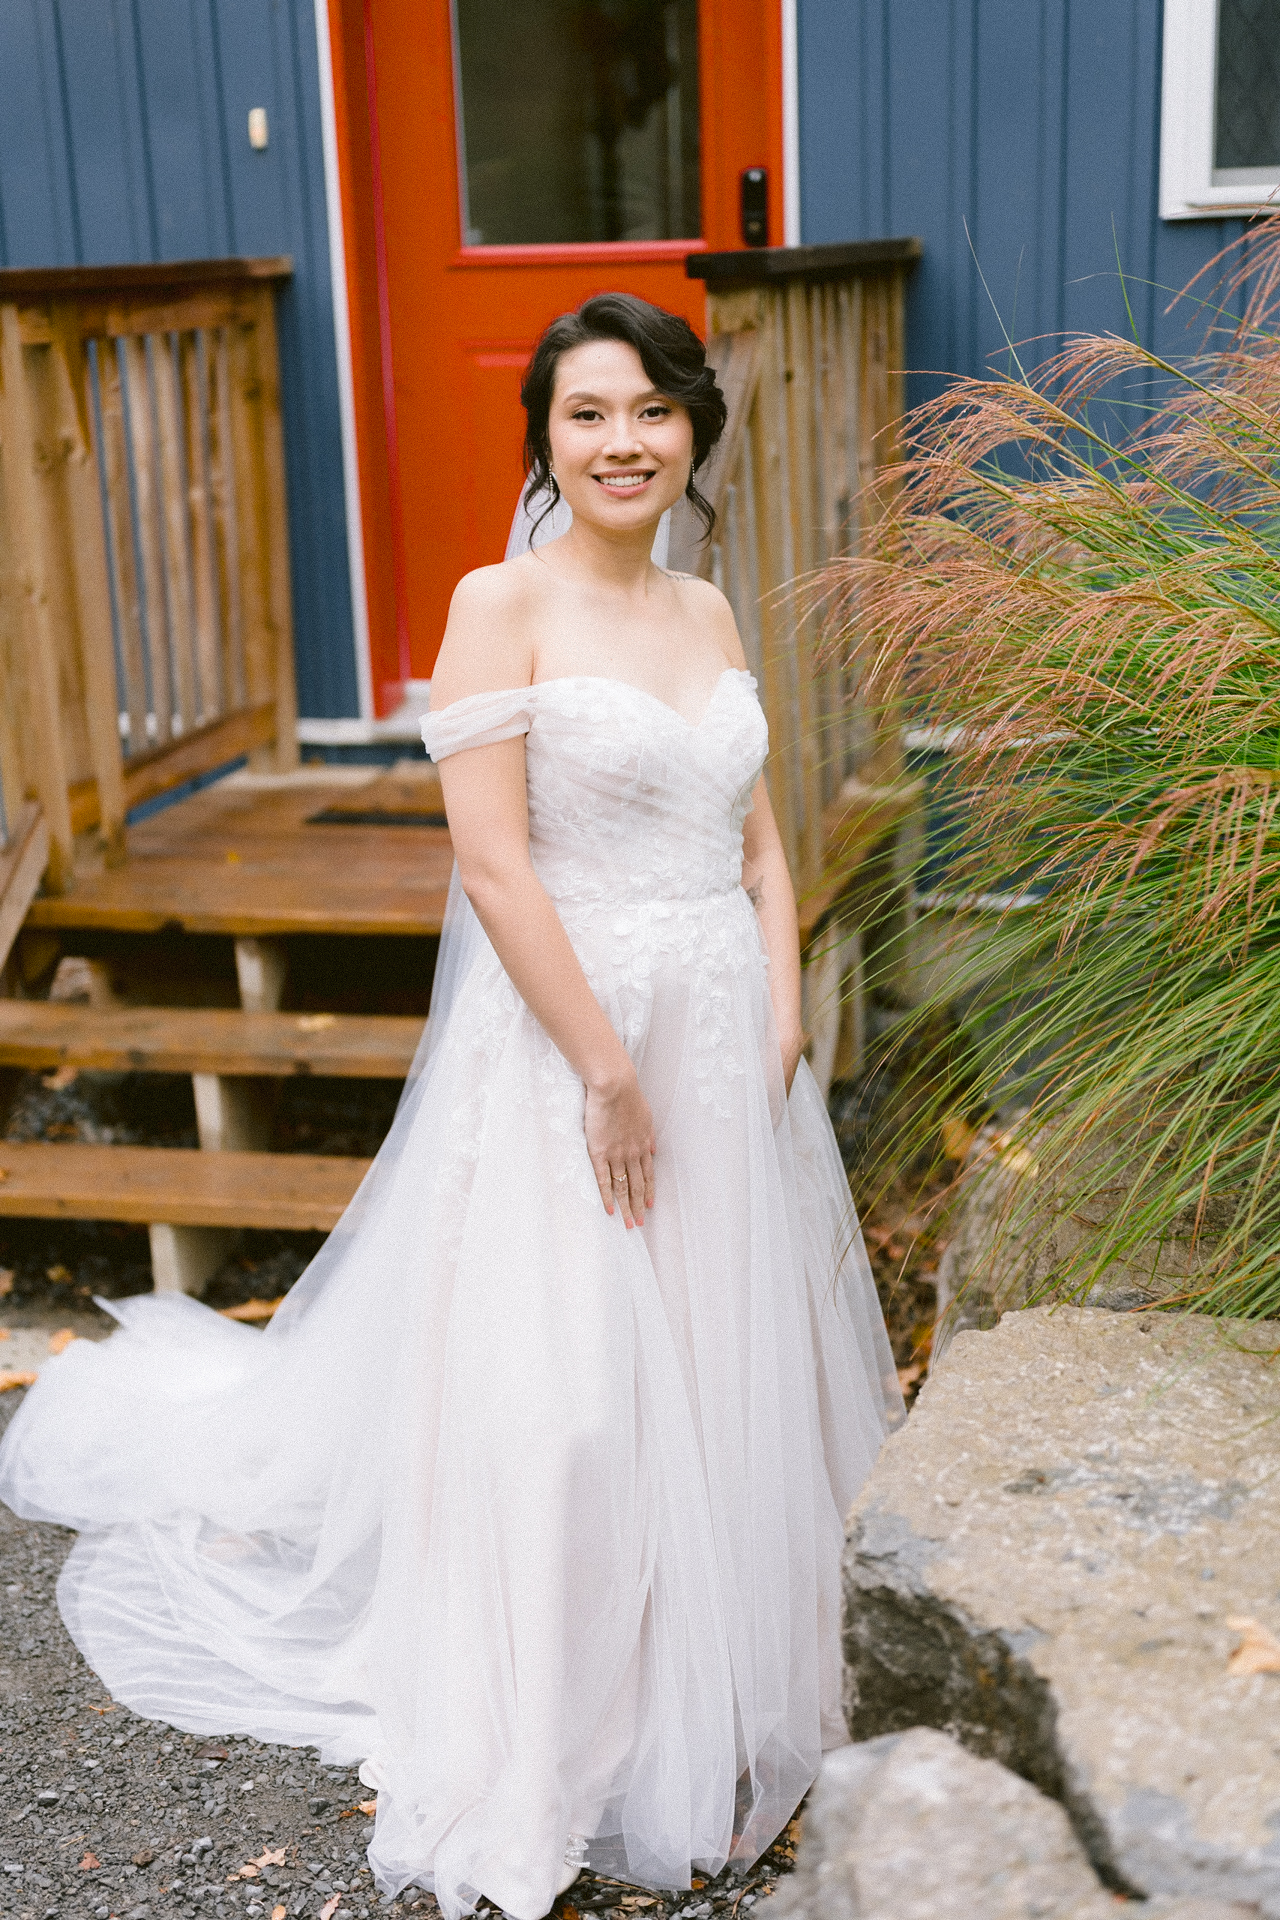 A bride in a white gown in front of a blue house with a red door.